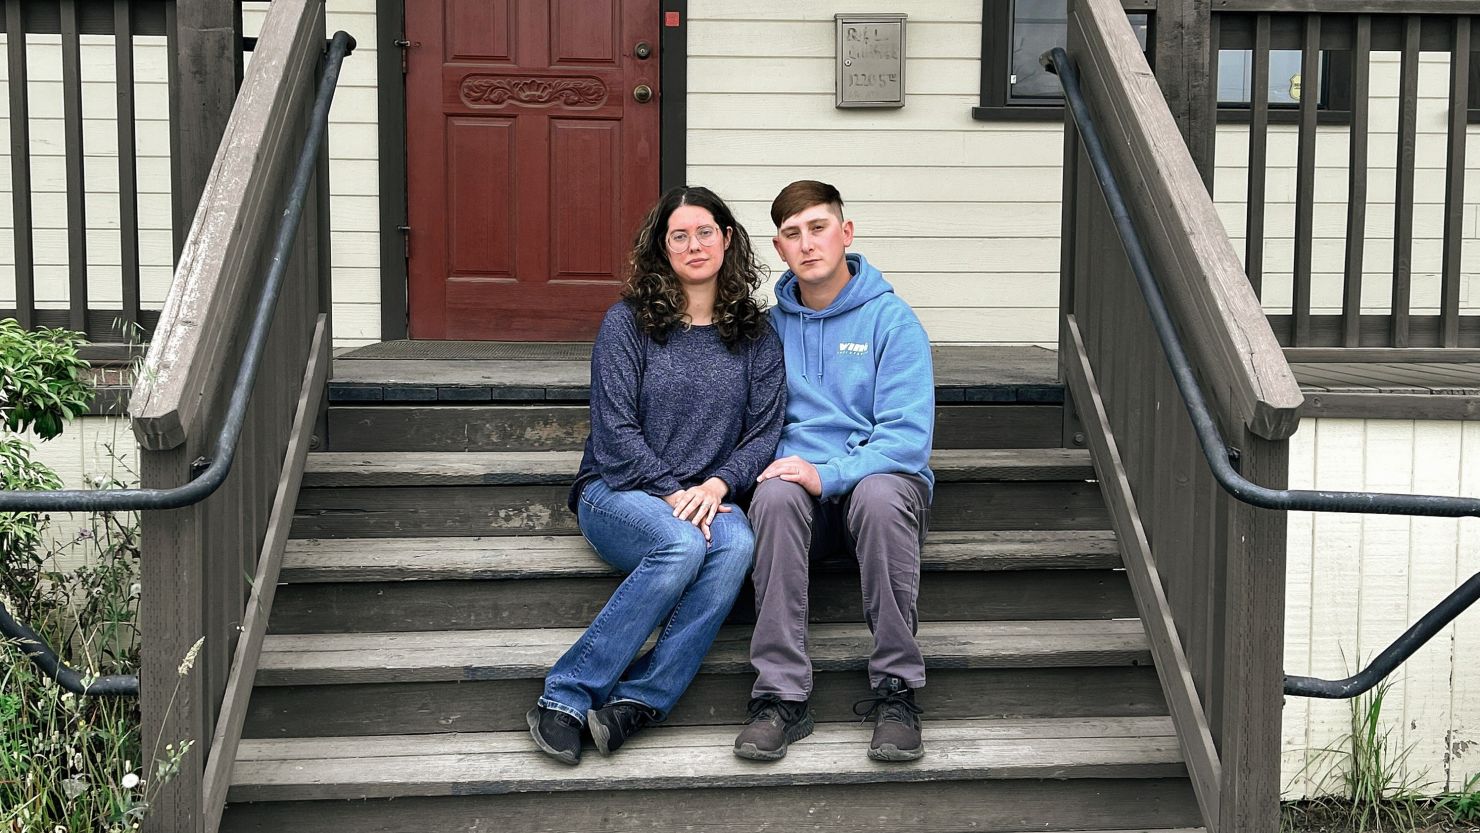 Jacqui McIntosh and her husband, Shane McIntosh, are shown in front of their office in Arcata, California, on June 9.